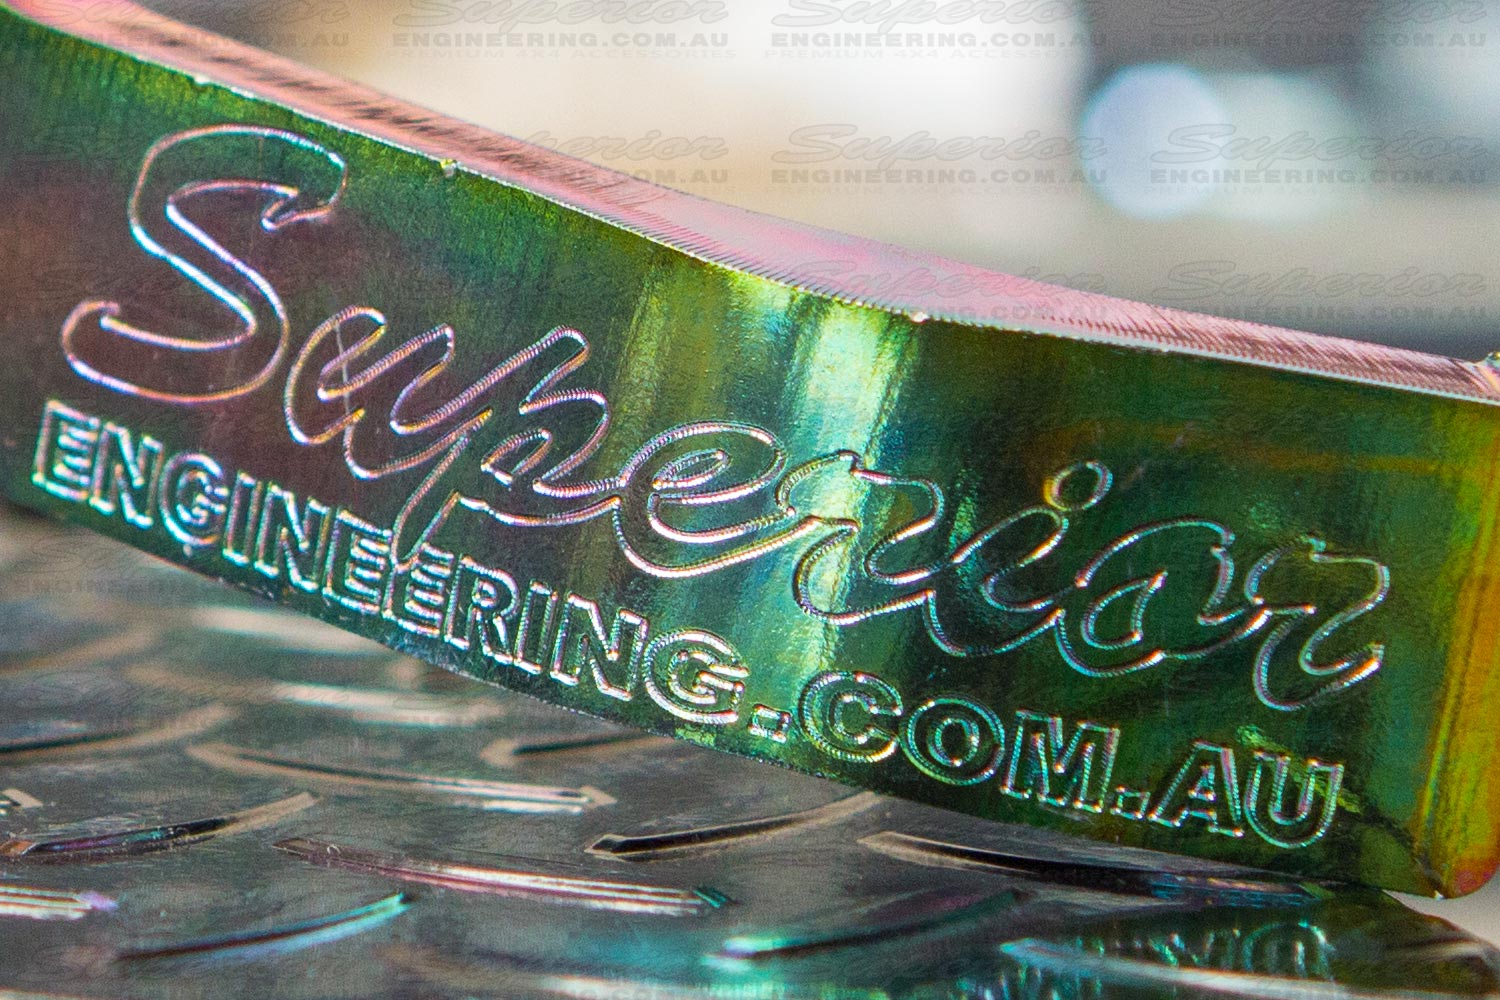 Closeup view of the Superior Engineering logo engraved onto the face of the Coil Retainer